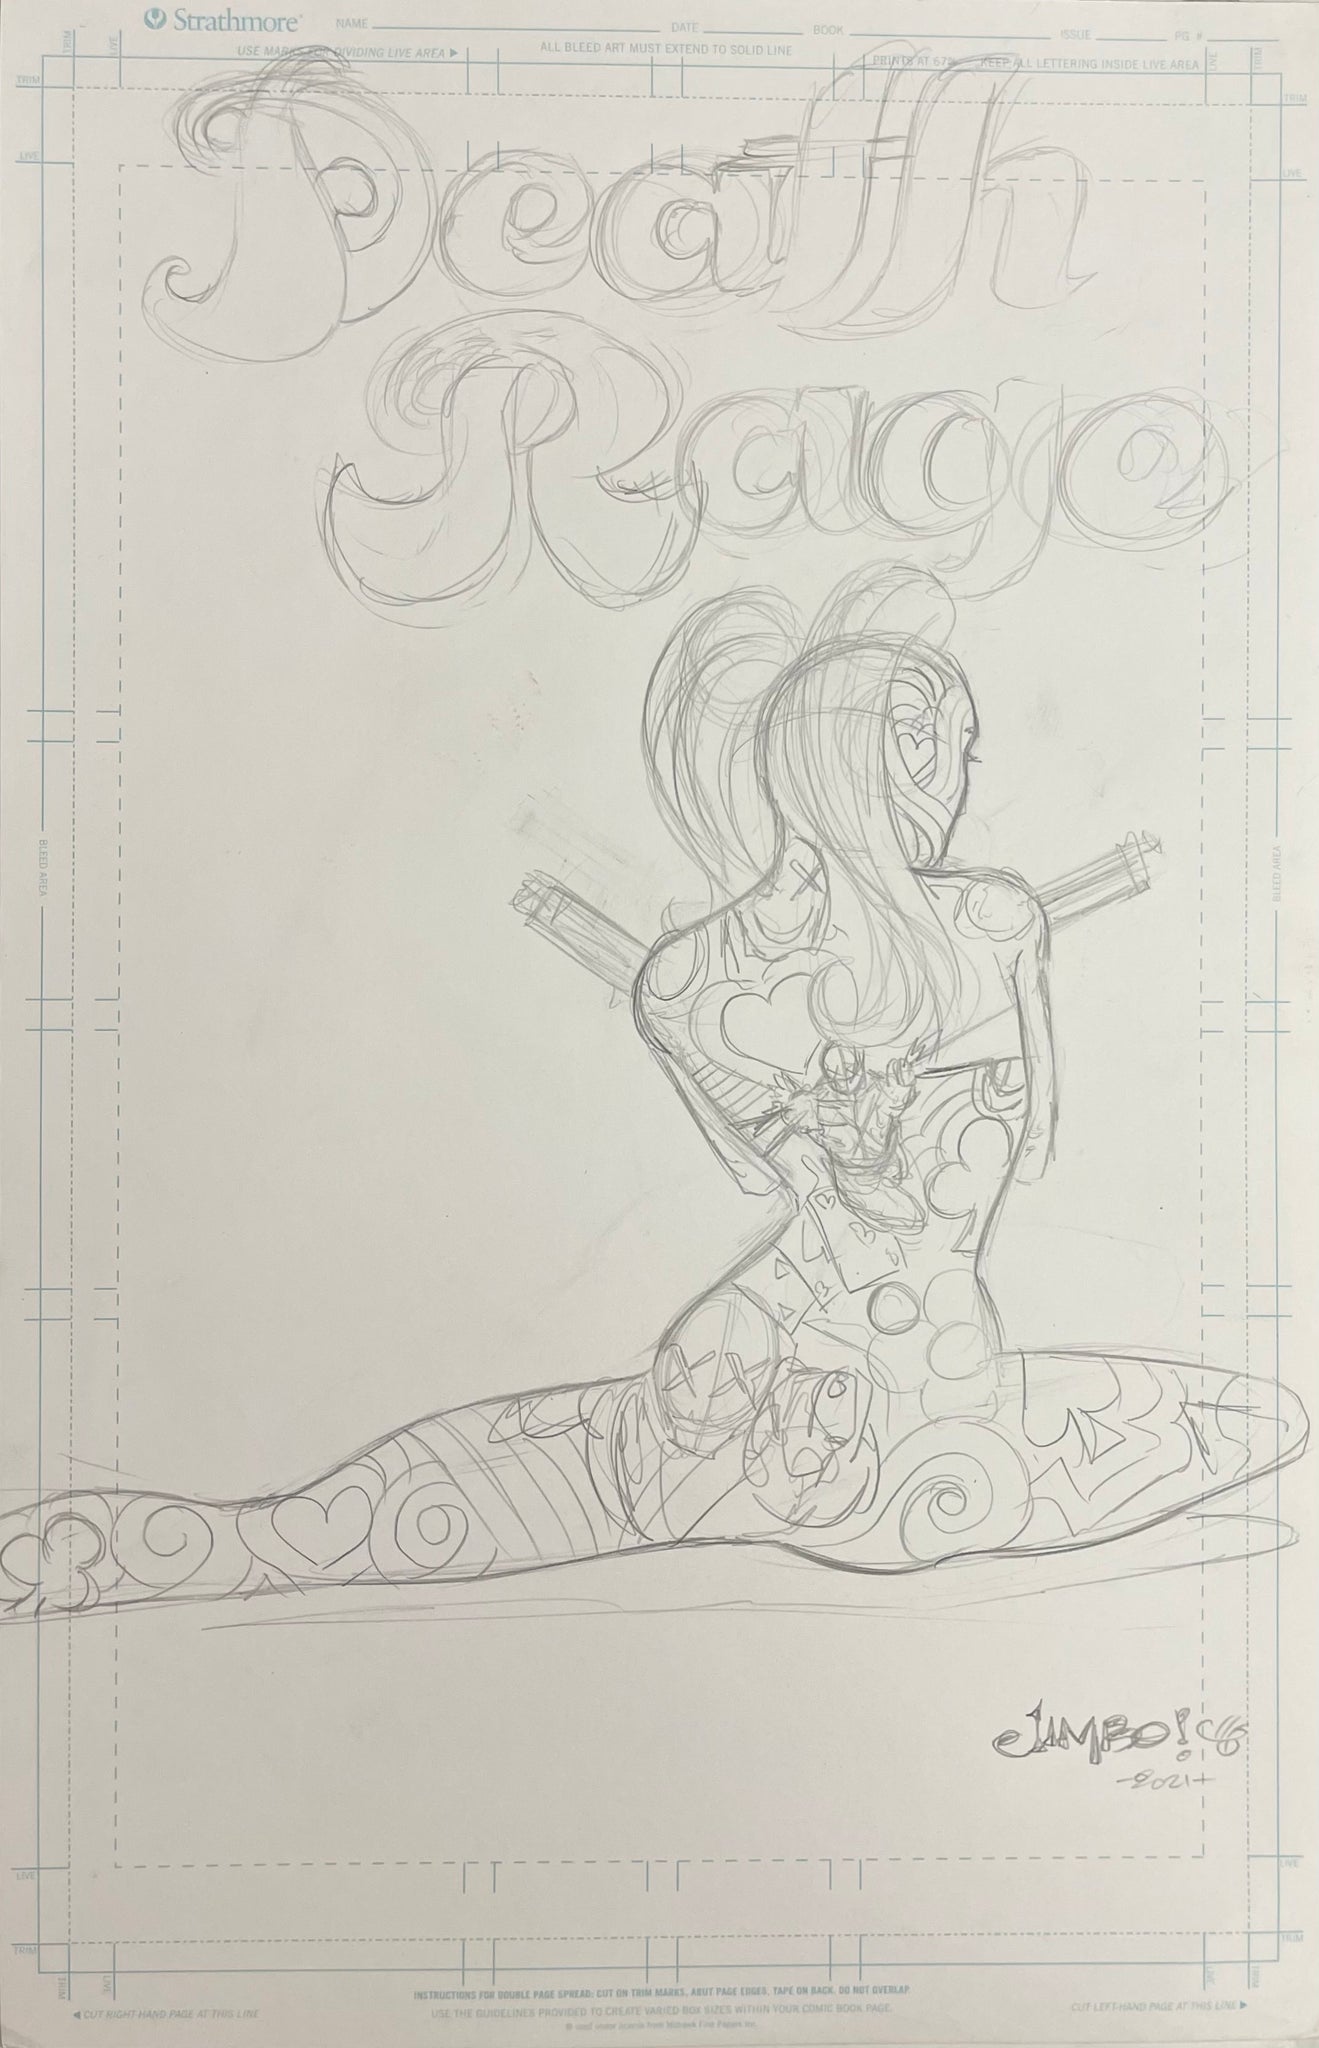 Fire Kiss # 1 & Deathrage #2 covers + prelim 2021